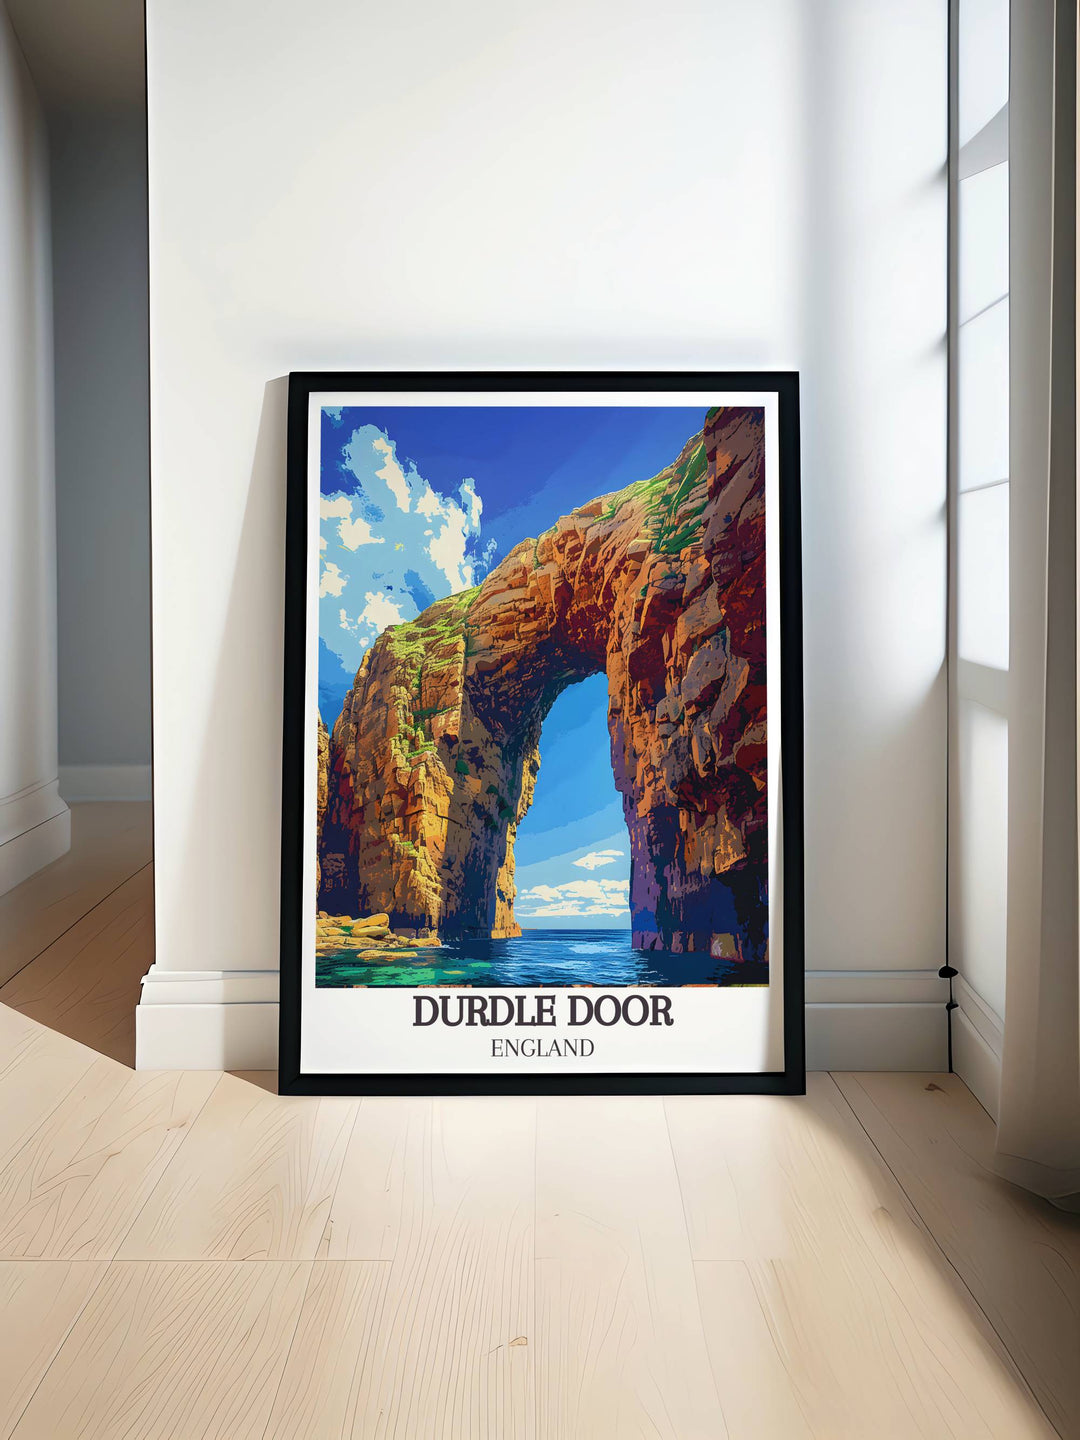 Durdle Door Arch at the Jurassic Coast captured in stunning Dorset photography perfect for enhancing home decor with vintage travel prints and elegant wall art showcasing the natural beauty of Dorset ideal for gifts and interior design inspiration.